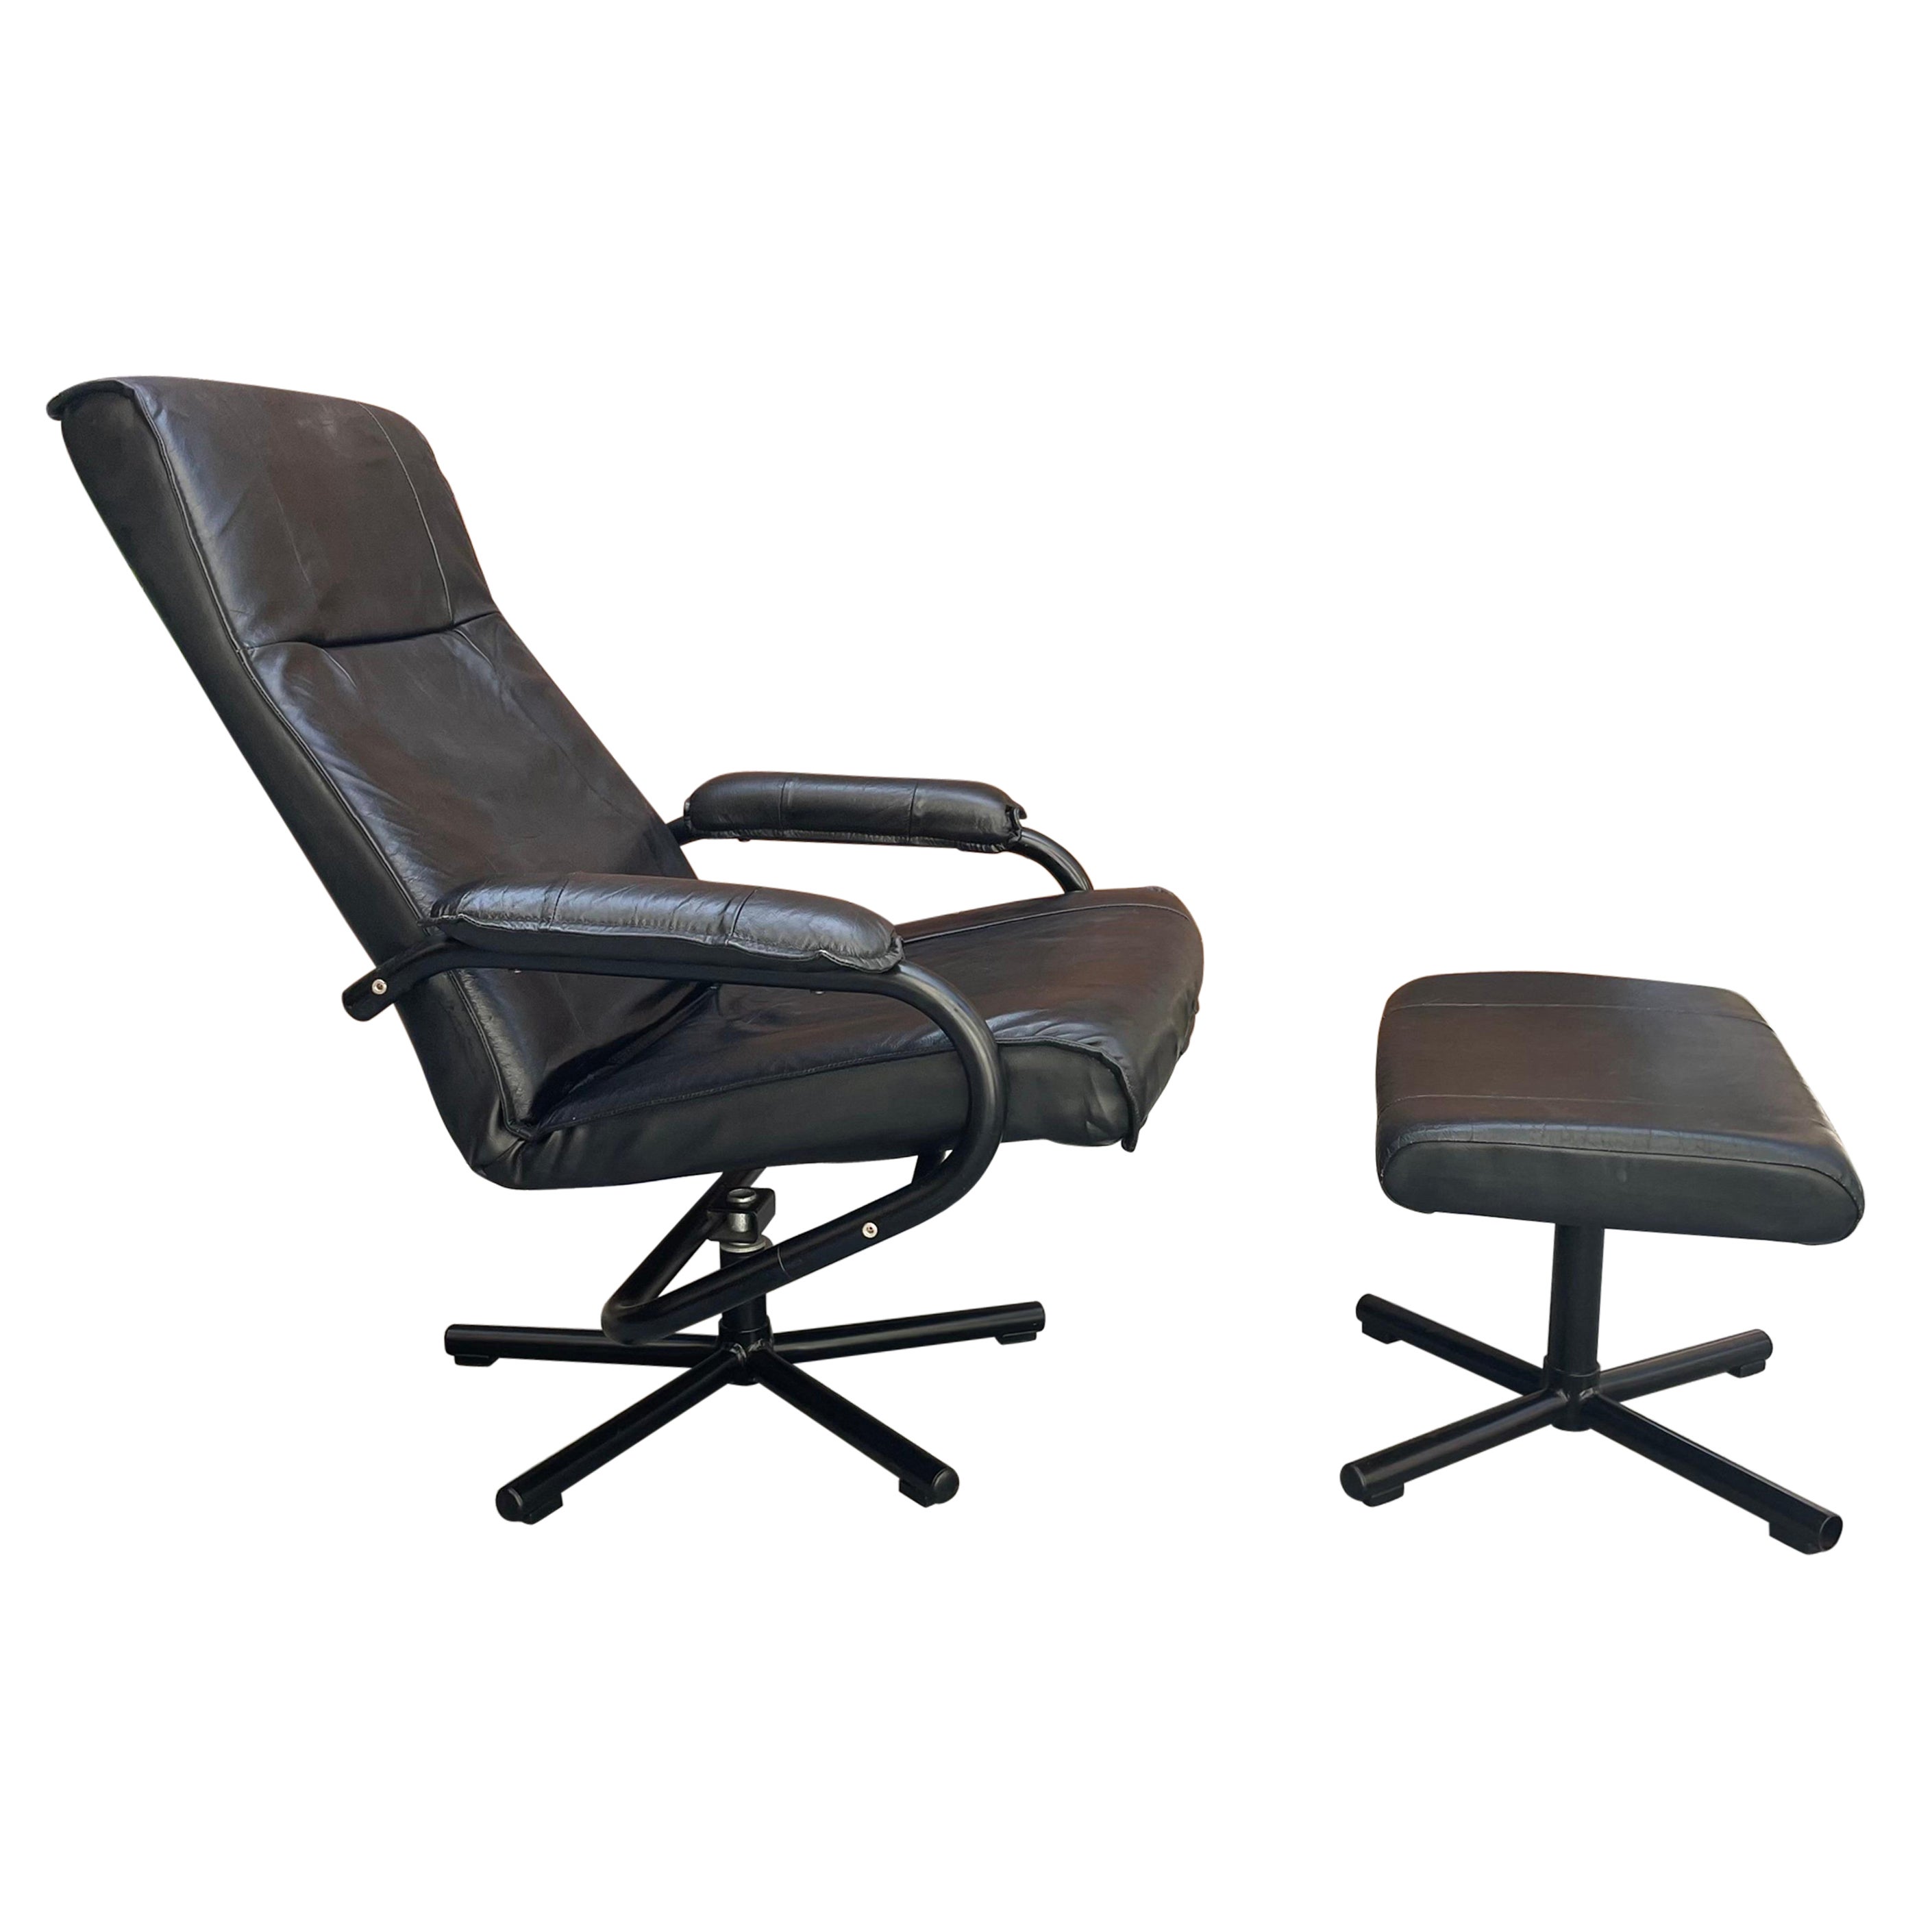 Vintage Danish Modern Leather Lounge Chair with Ottoman by Kebe 'Pair Available' For Sale